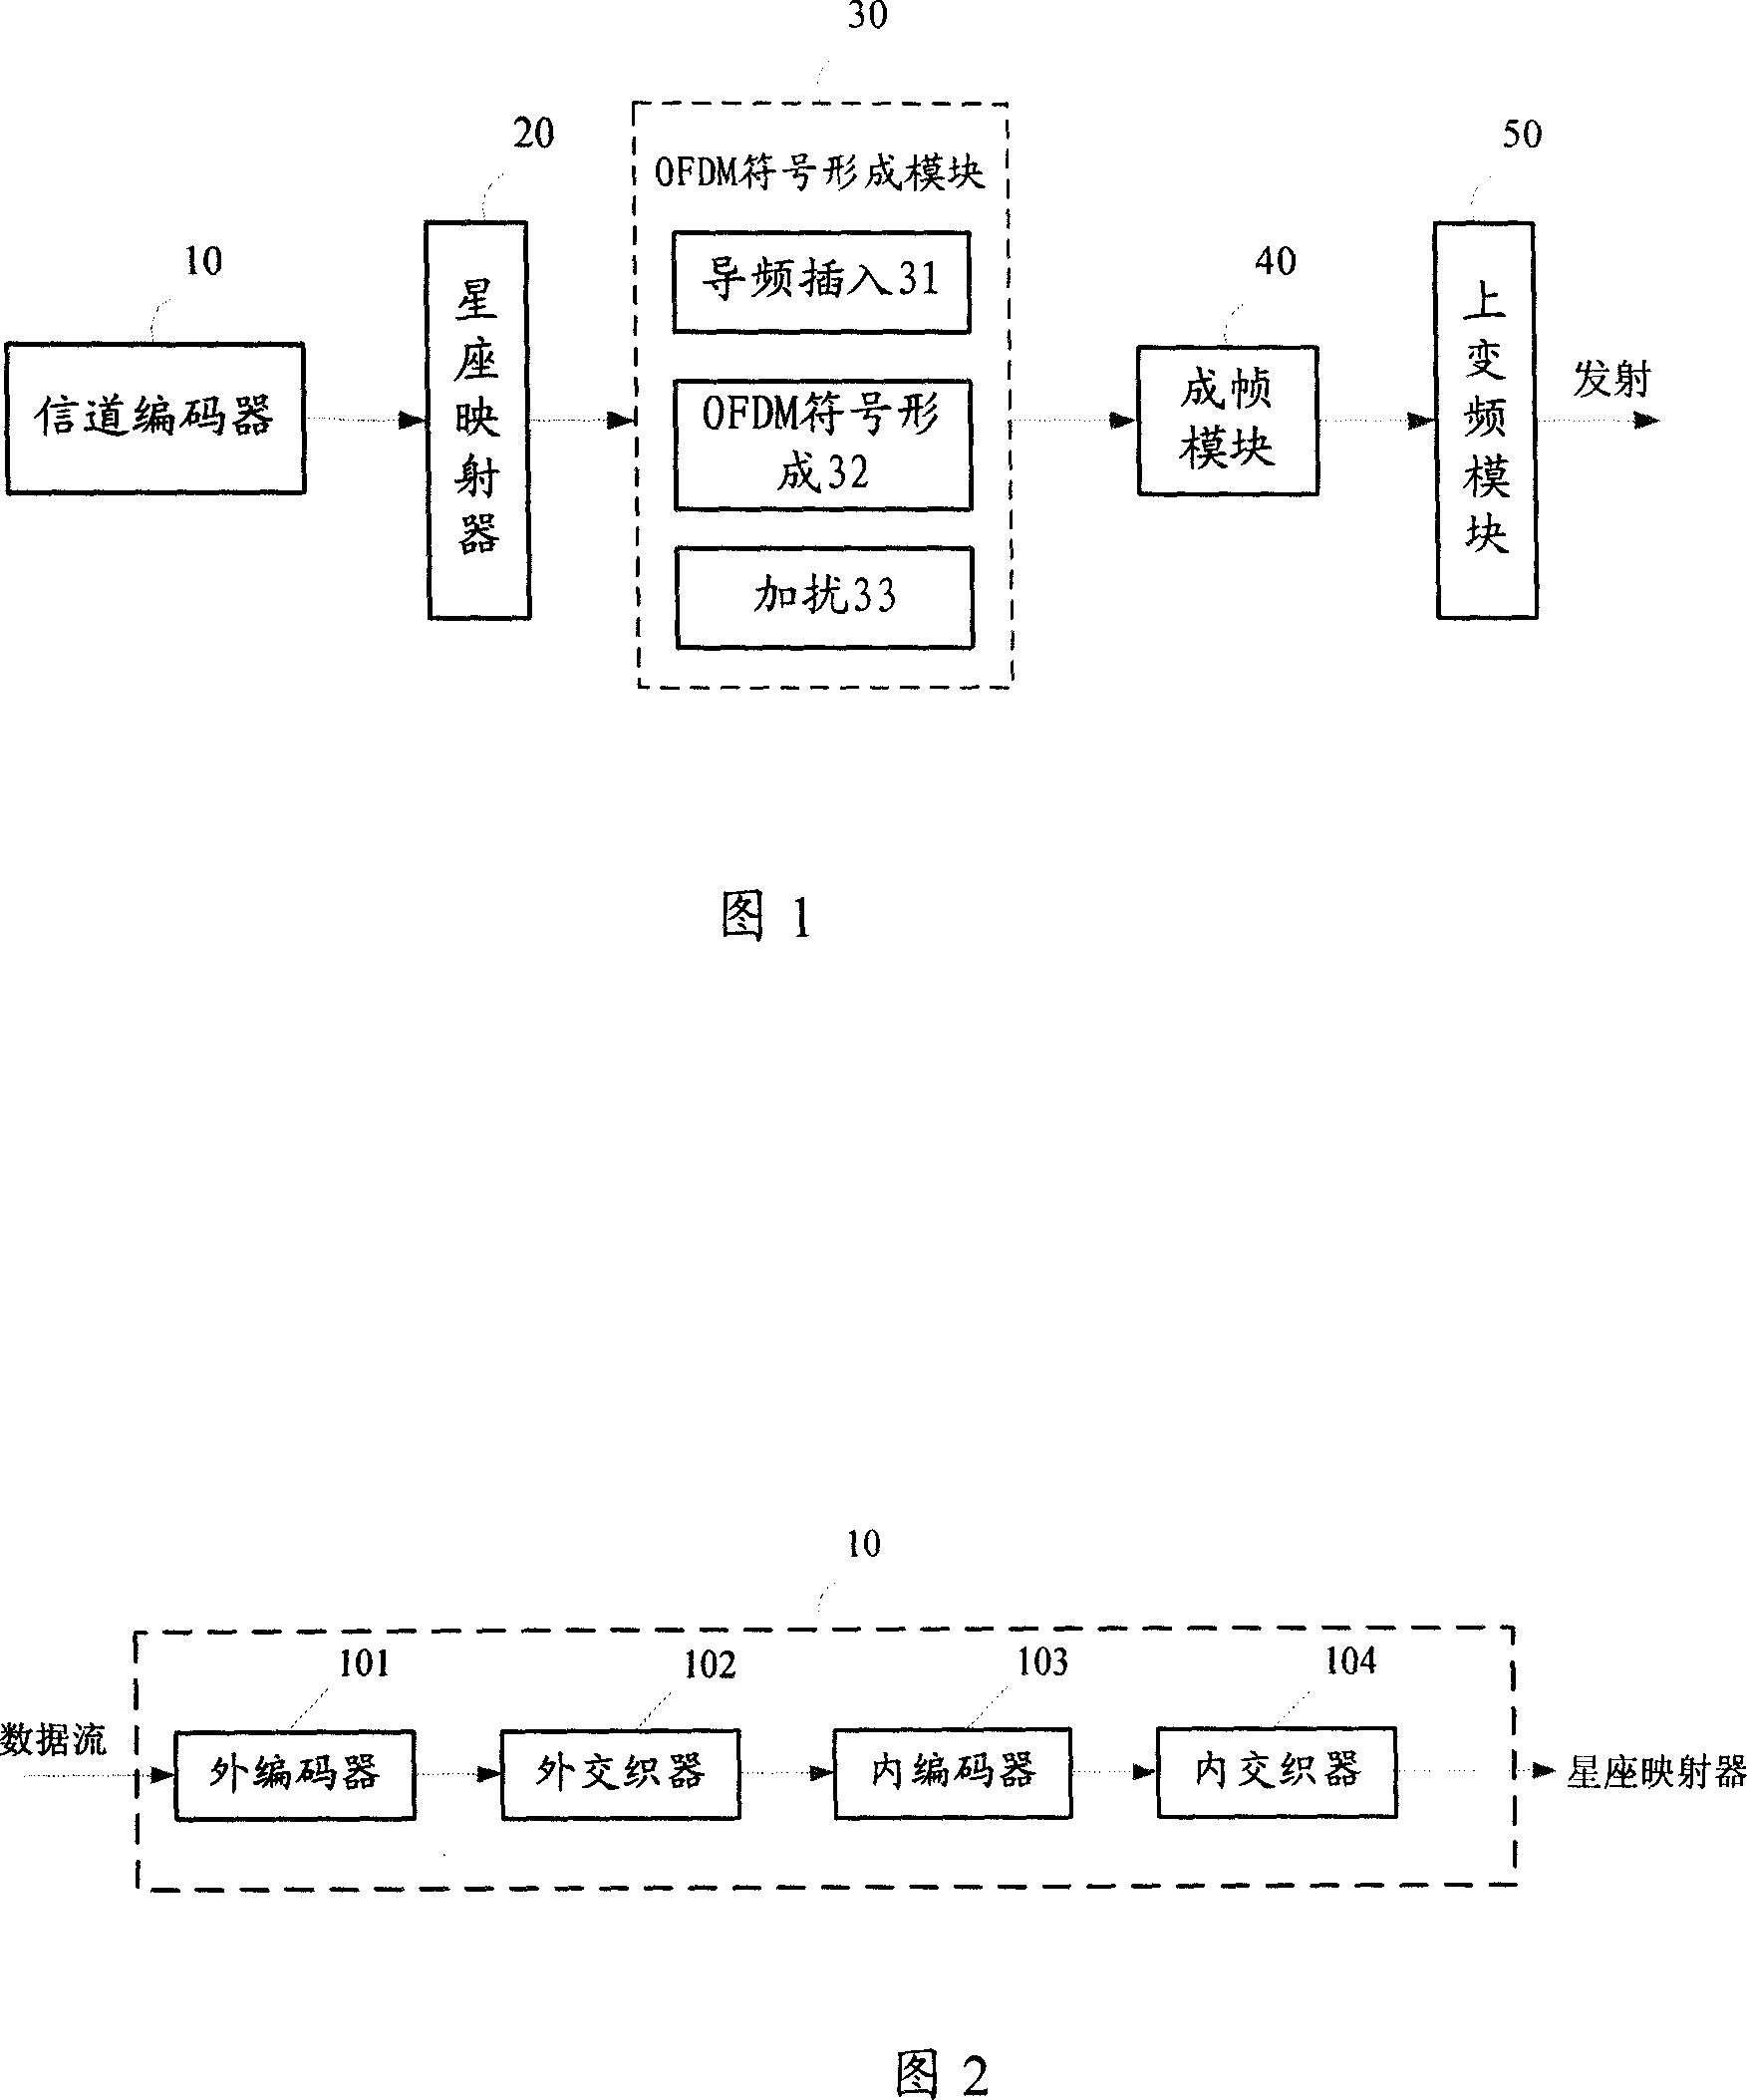 A transmission system and method of the mobile digital multimedia broadcast signals